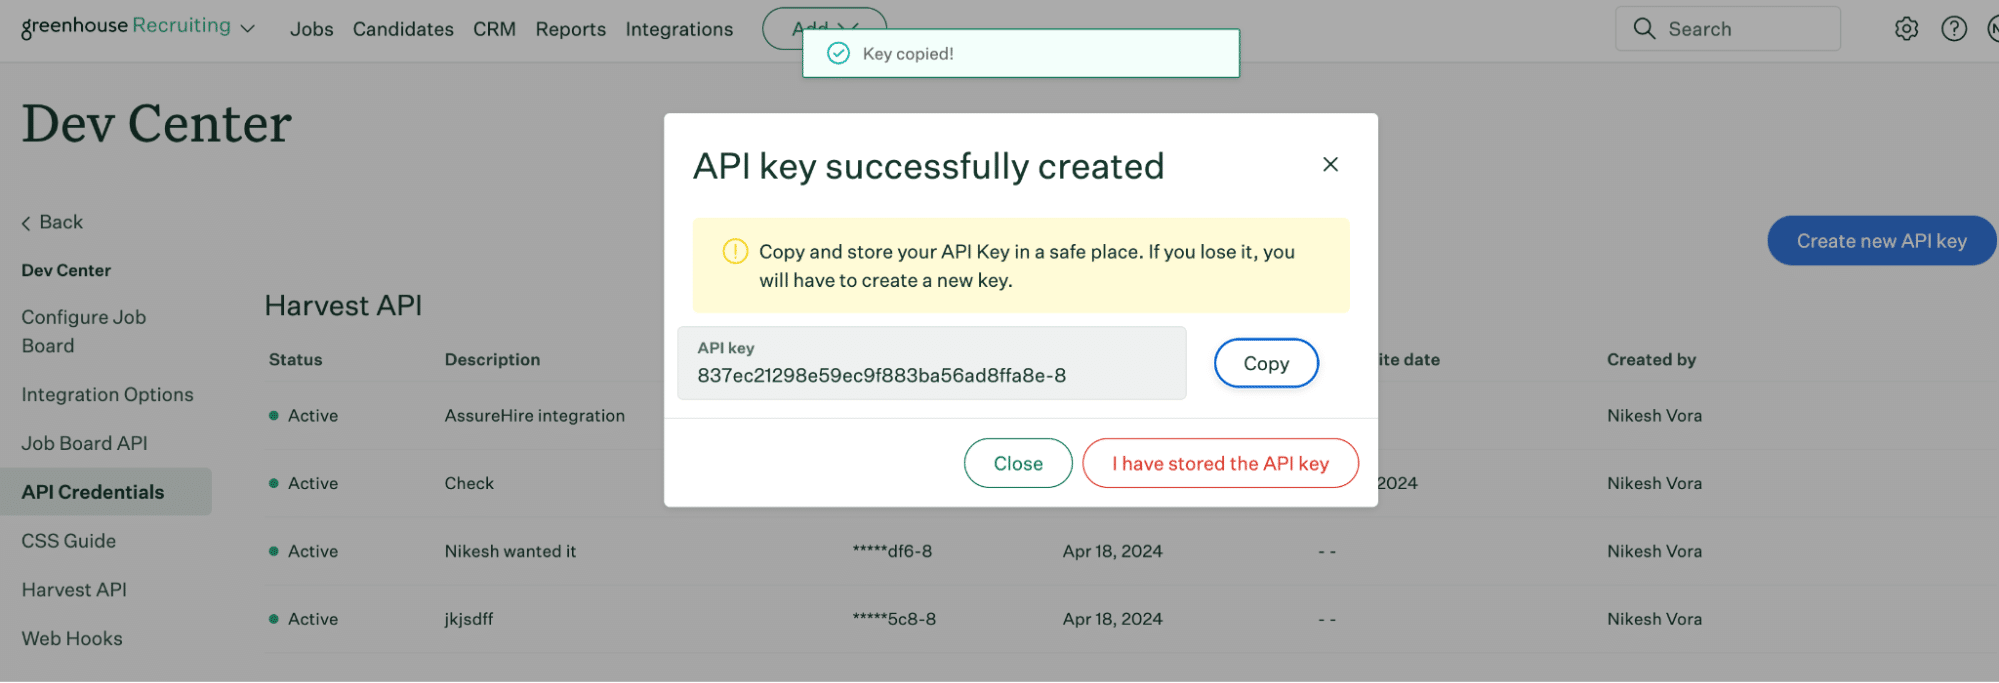 Saving updated permissions and finalizing API key creation in Greenhouse 